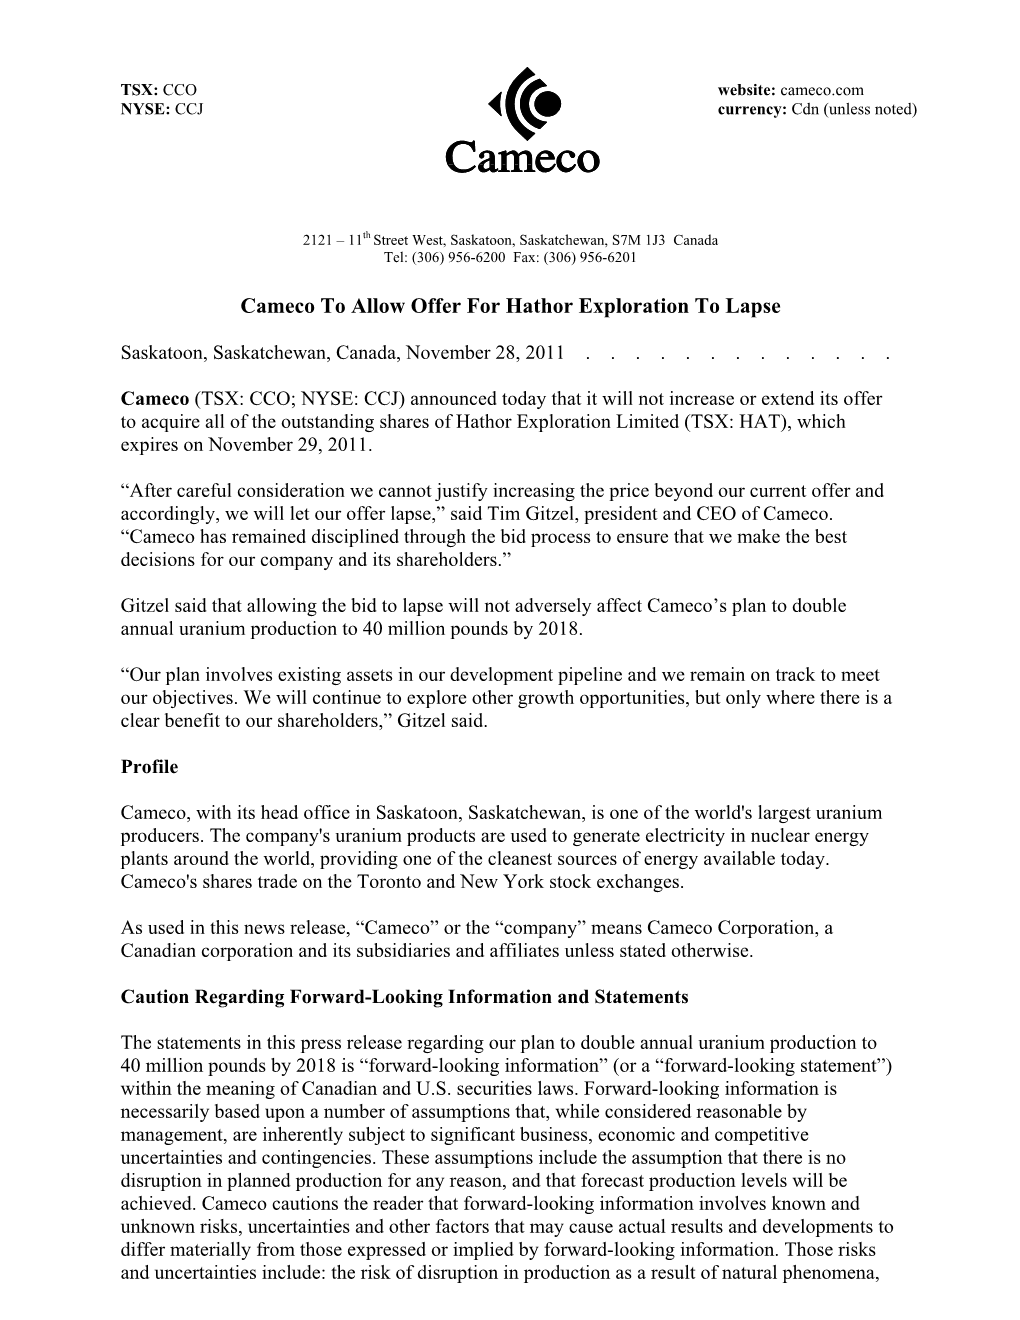 Cameco to Allow Offer for Hathor Exploration to Lapse